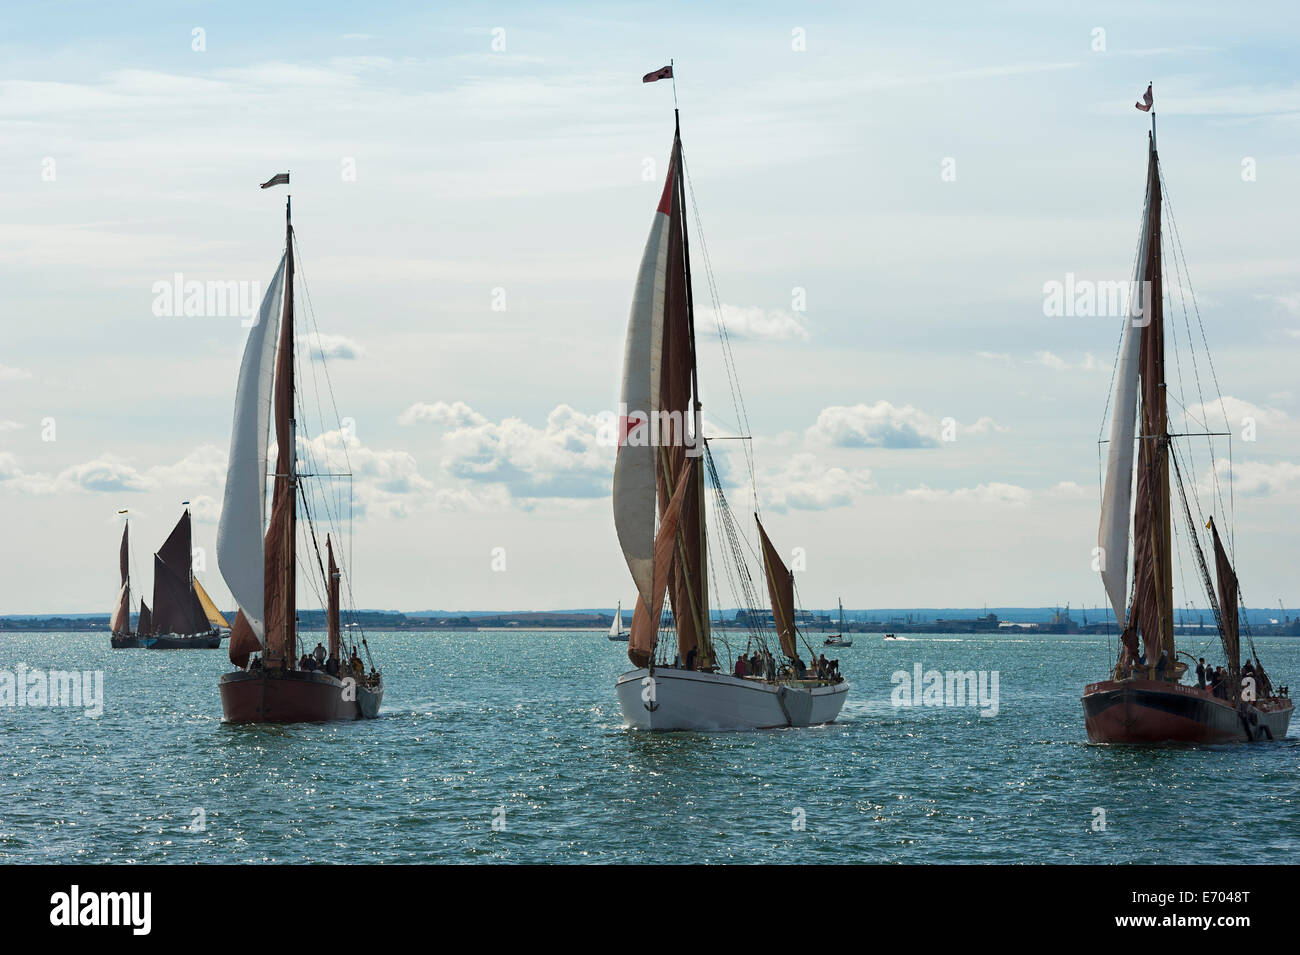 Mellissa Niagara and Repertor jostling for position at the start of the Southend on Sea Barge Match,2014. Stock Photo